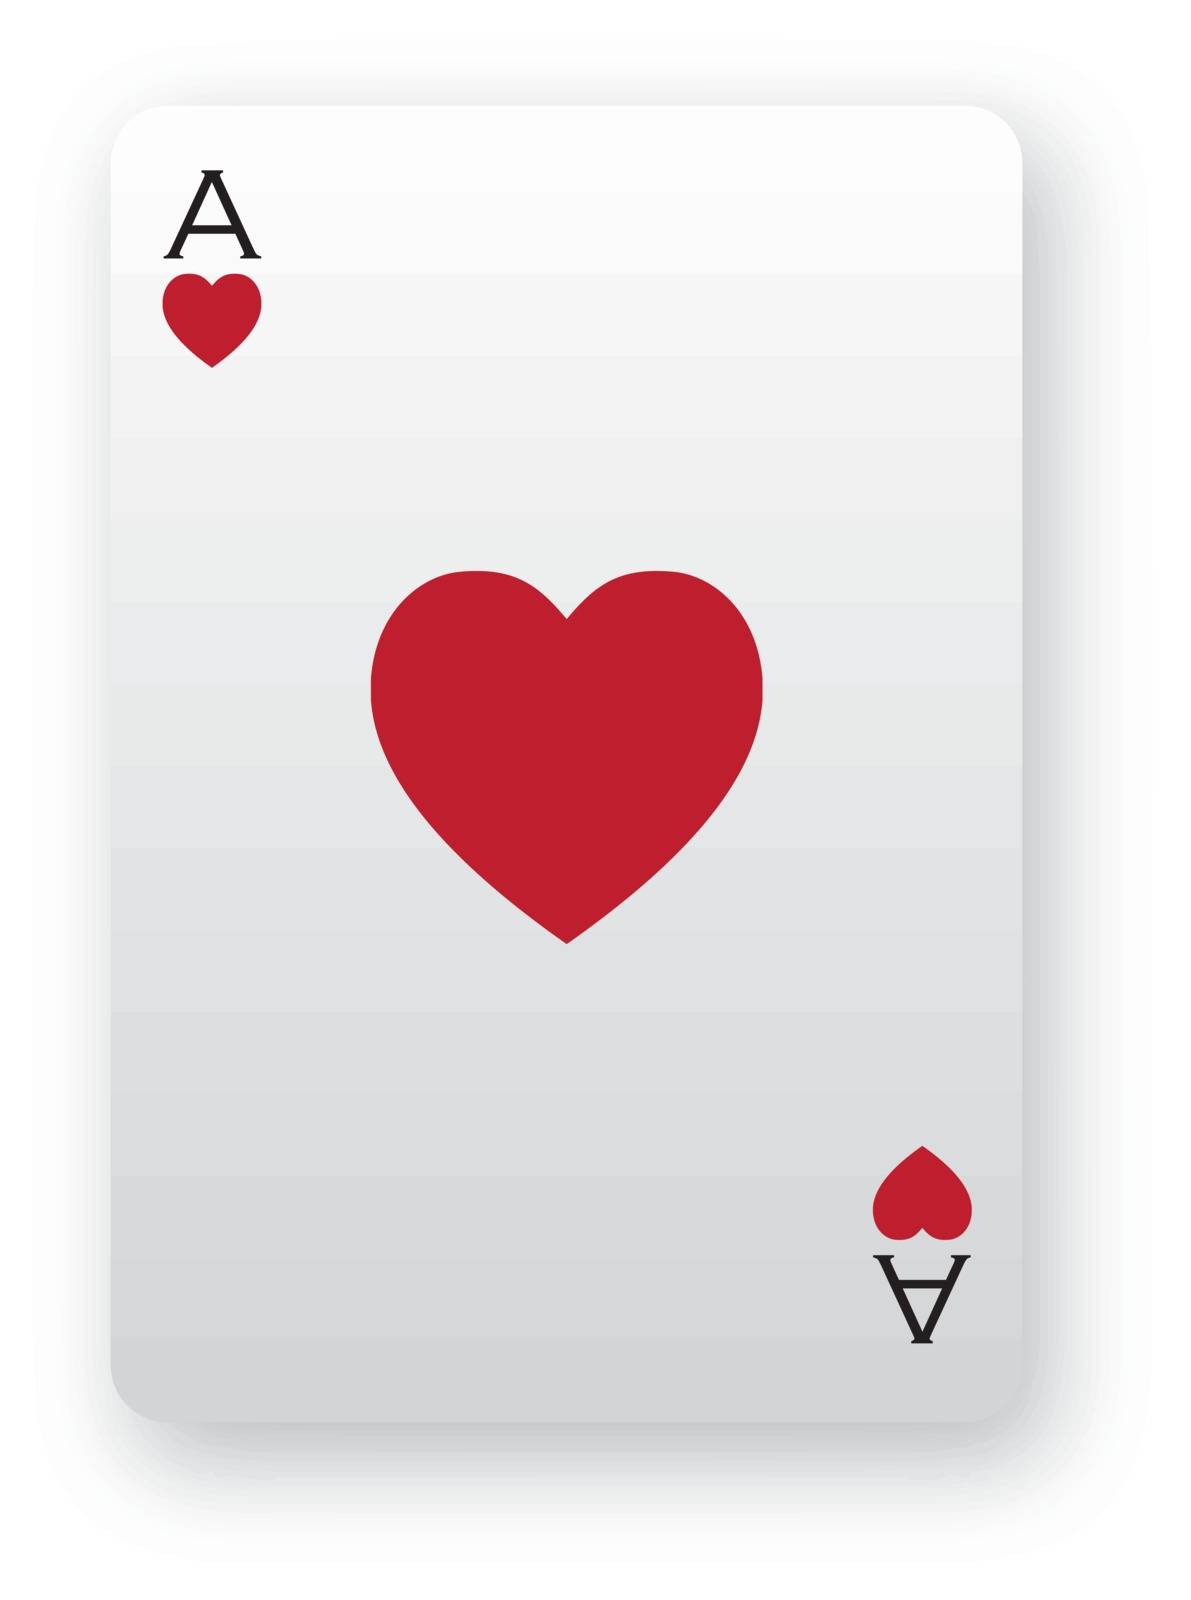 Ace of Hearts by mawrhis